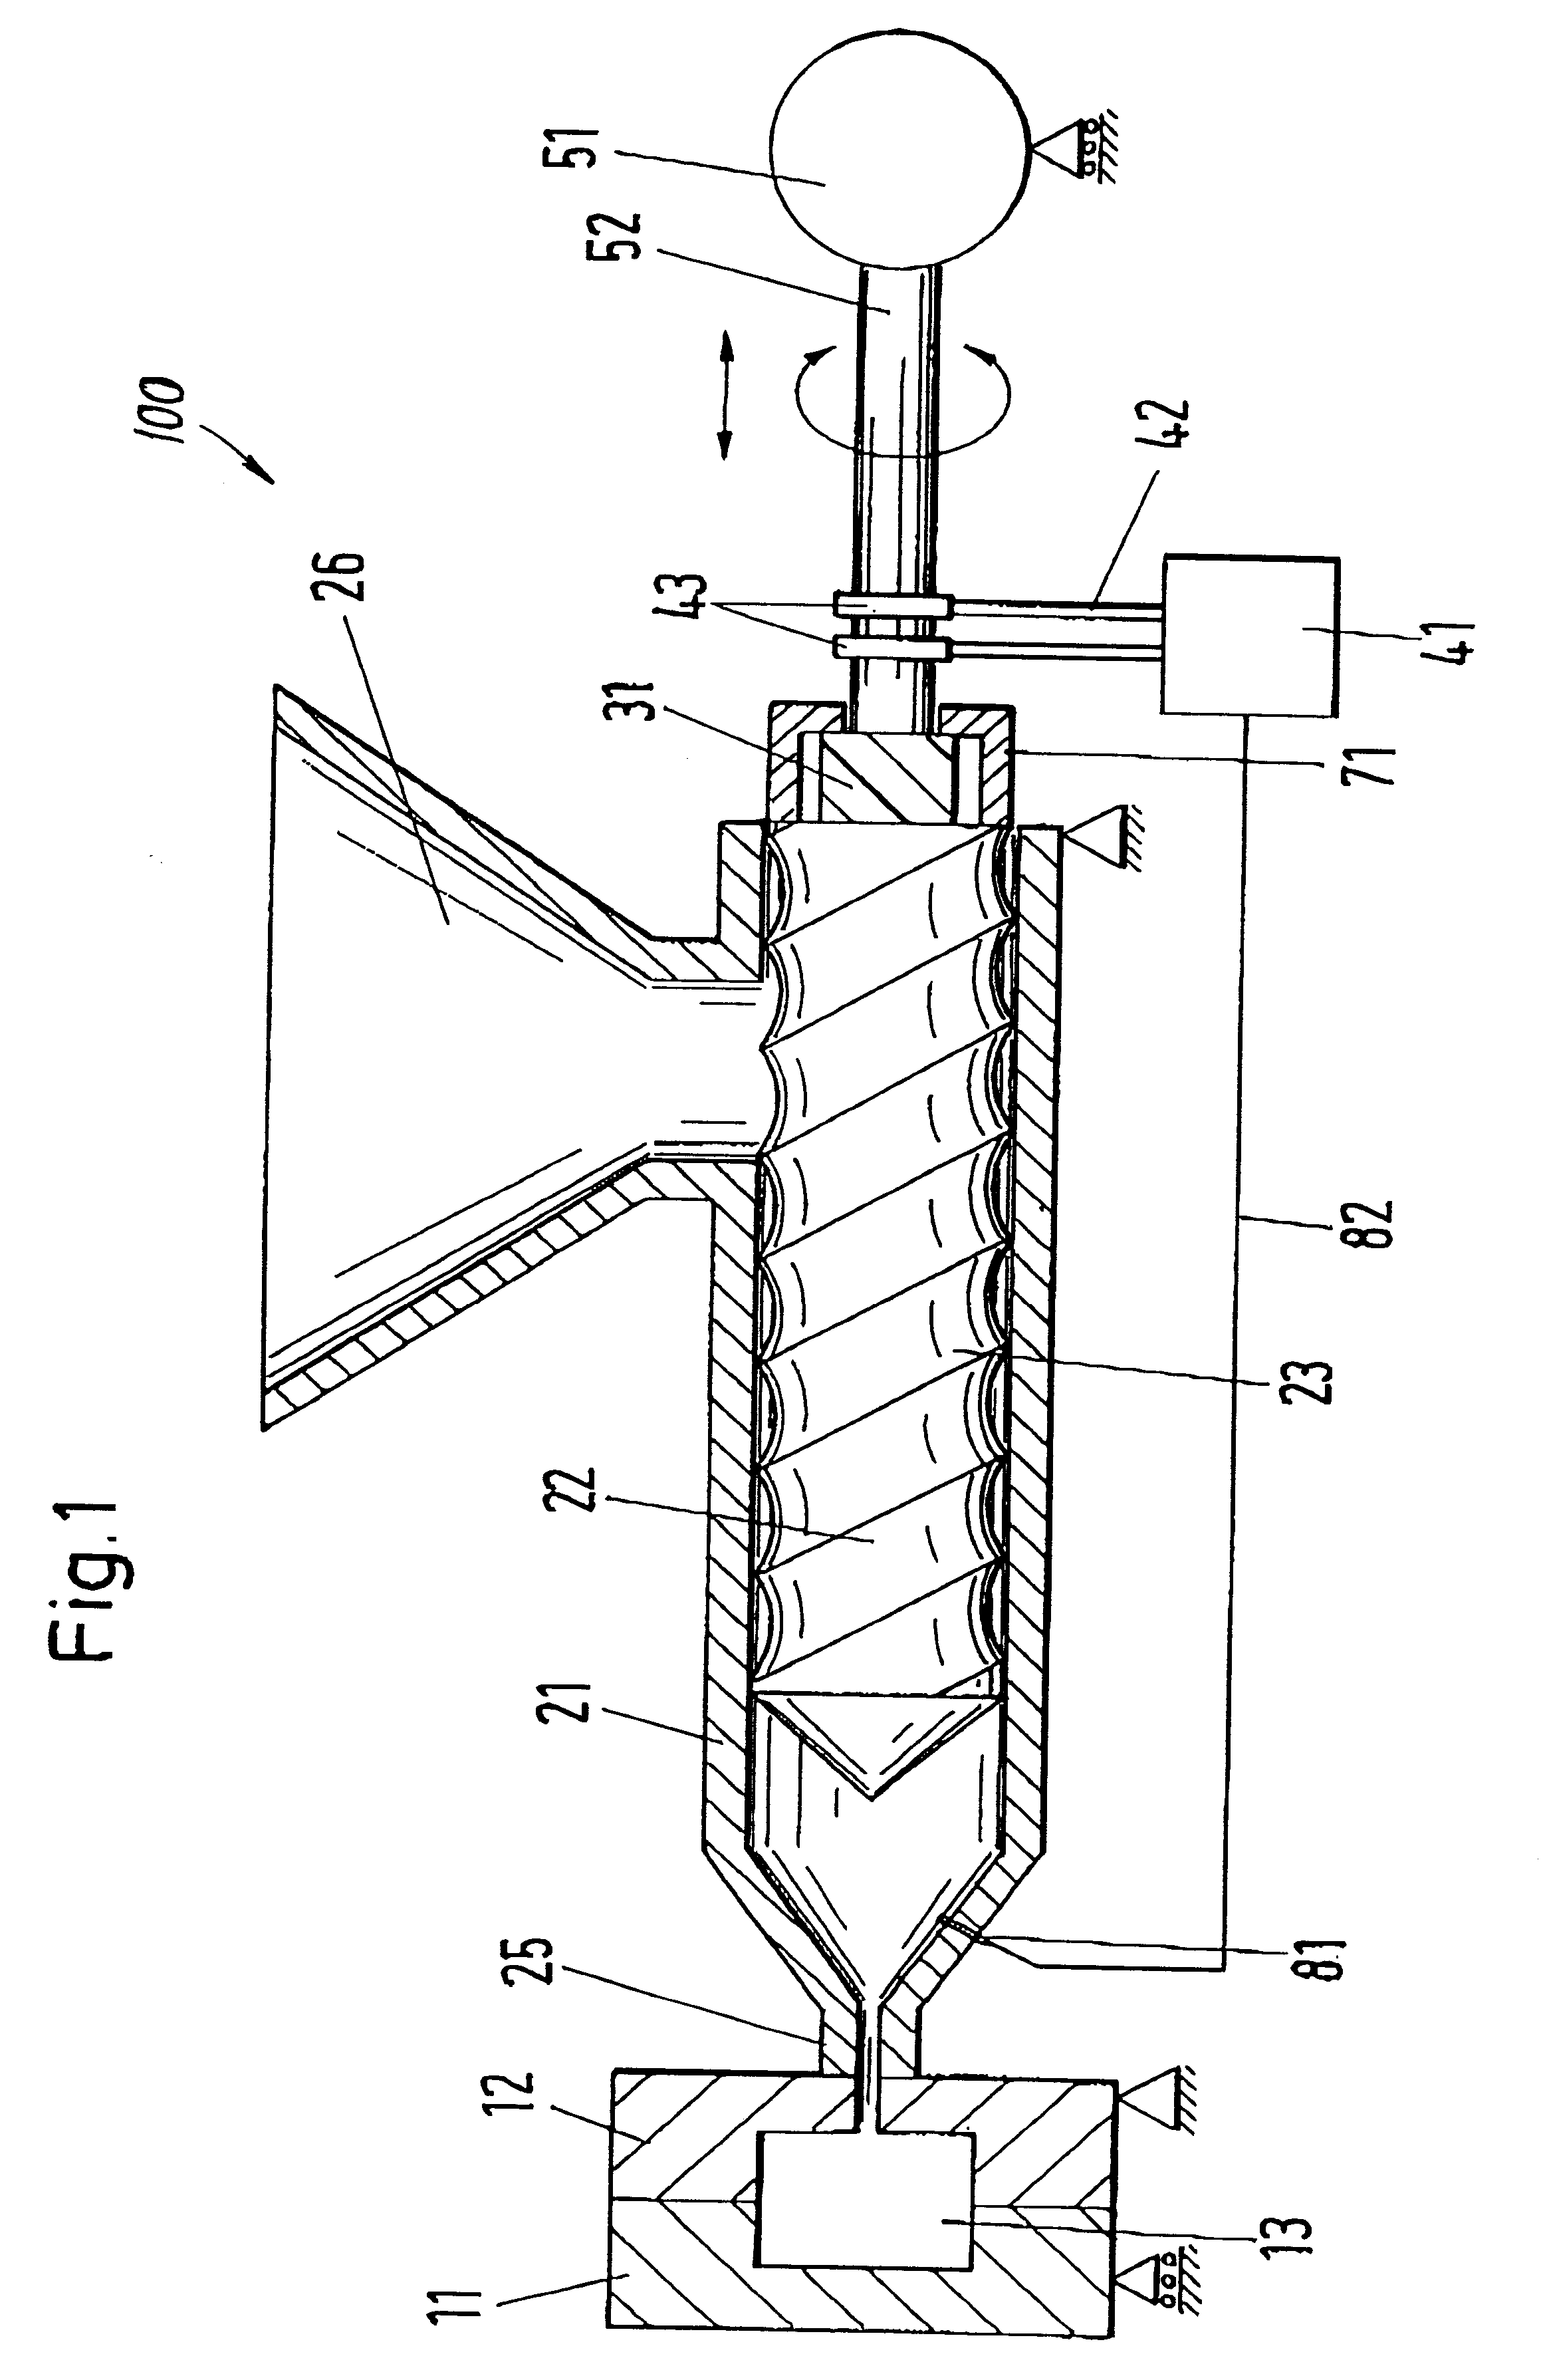 Resonating injection molding machine and process for its operation